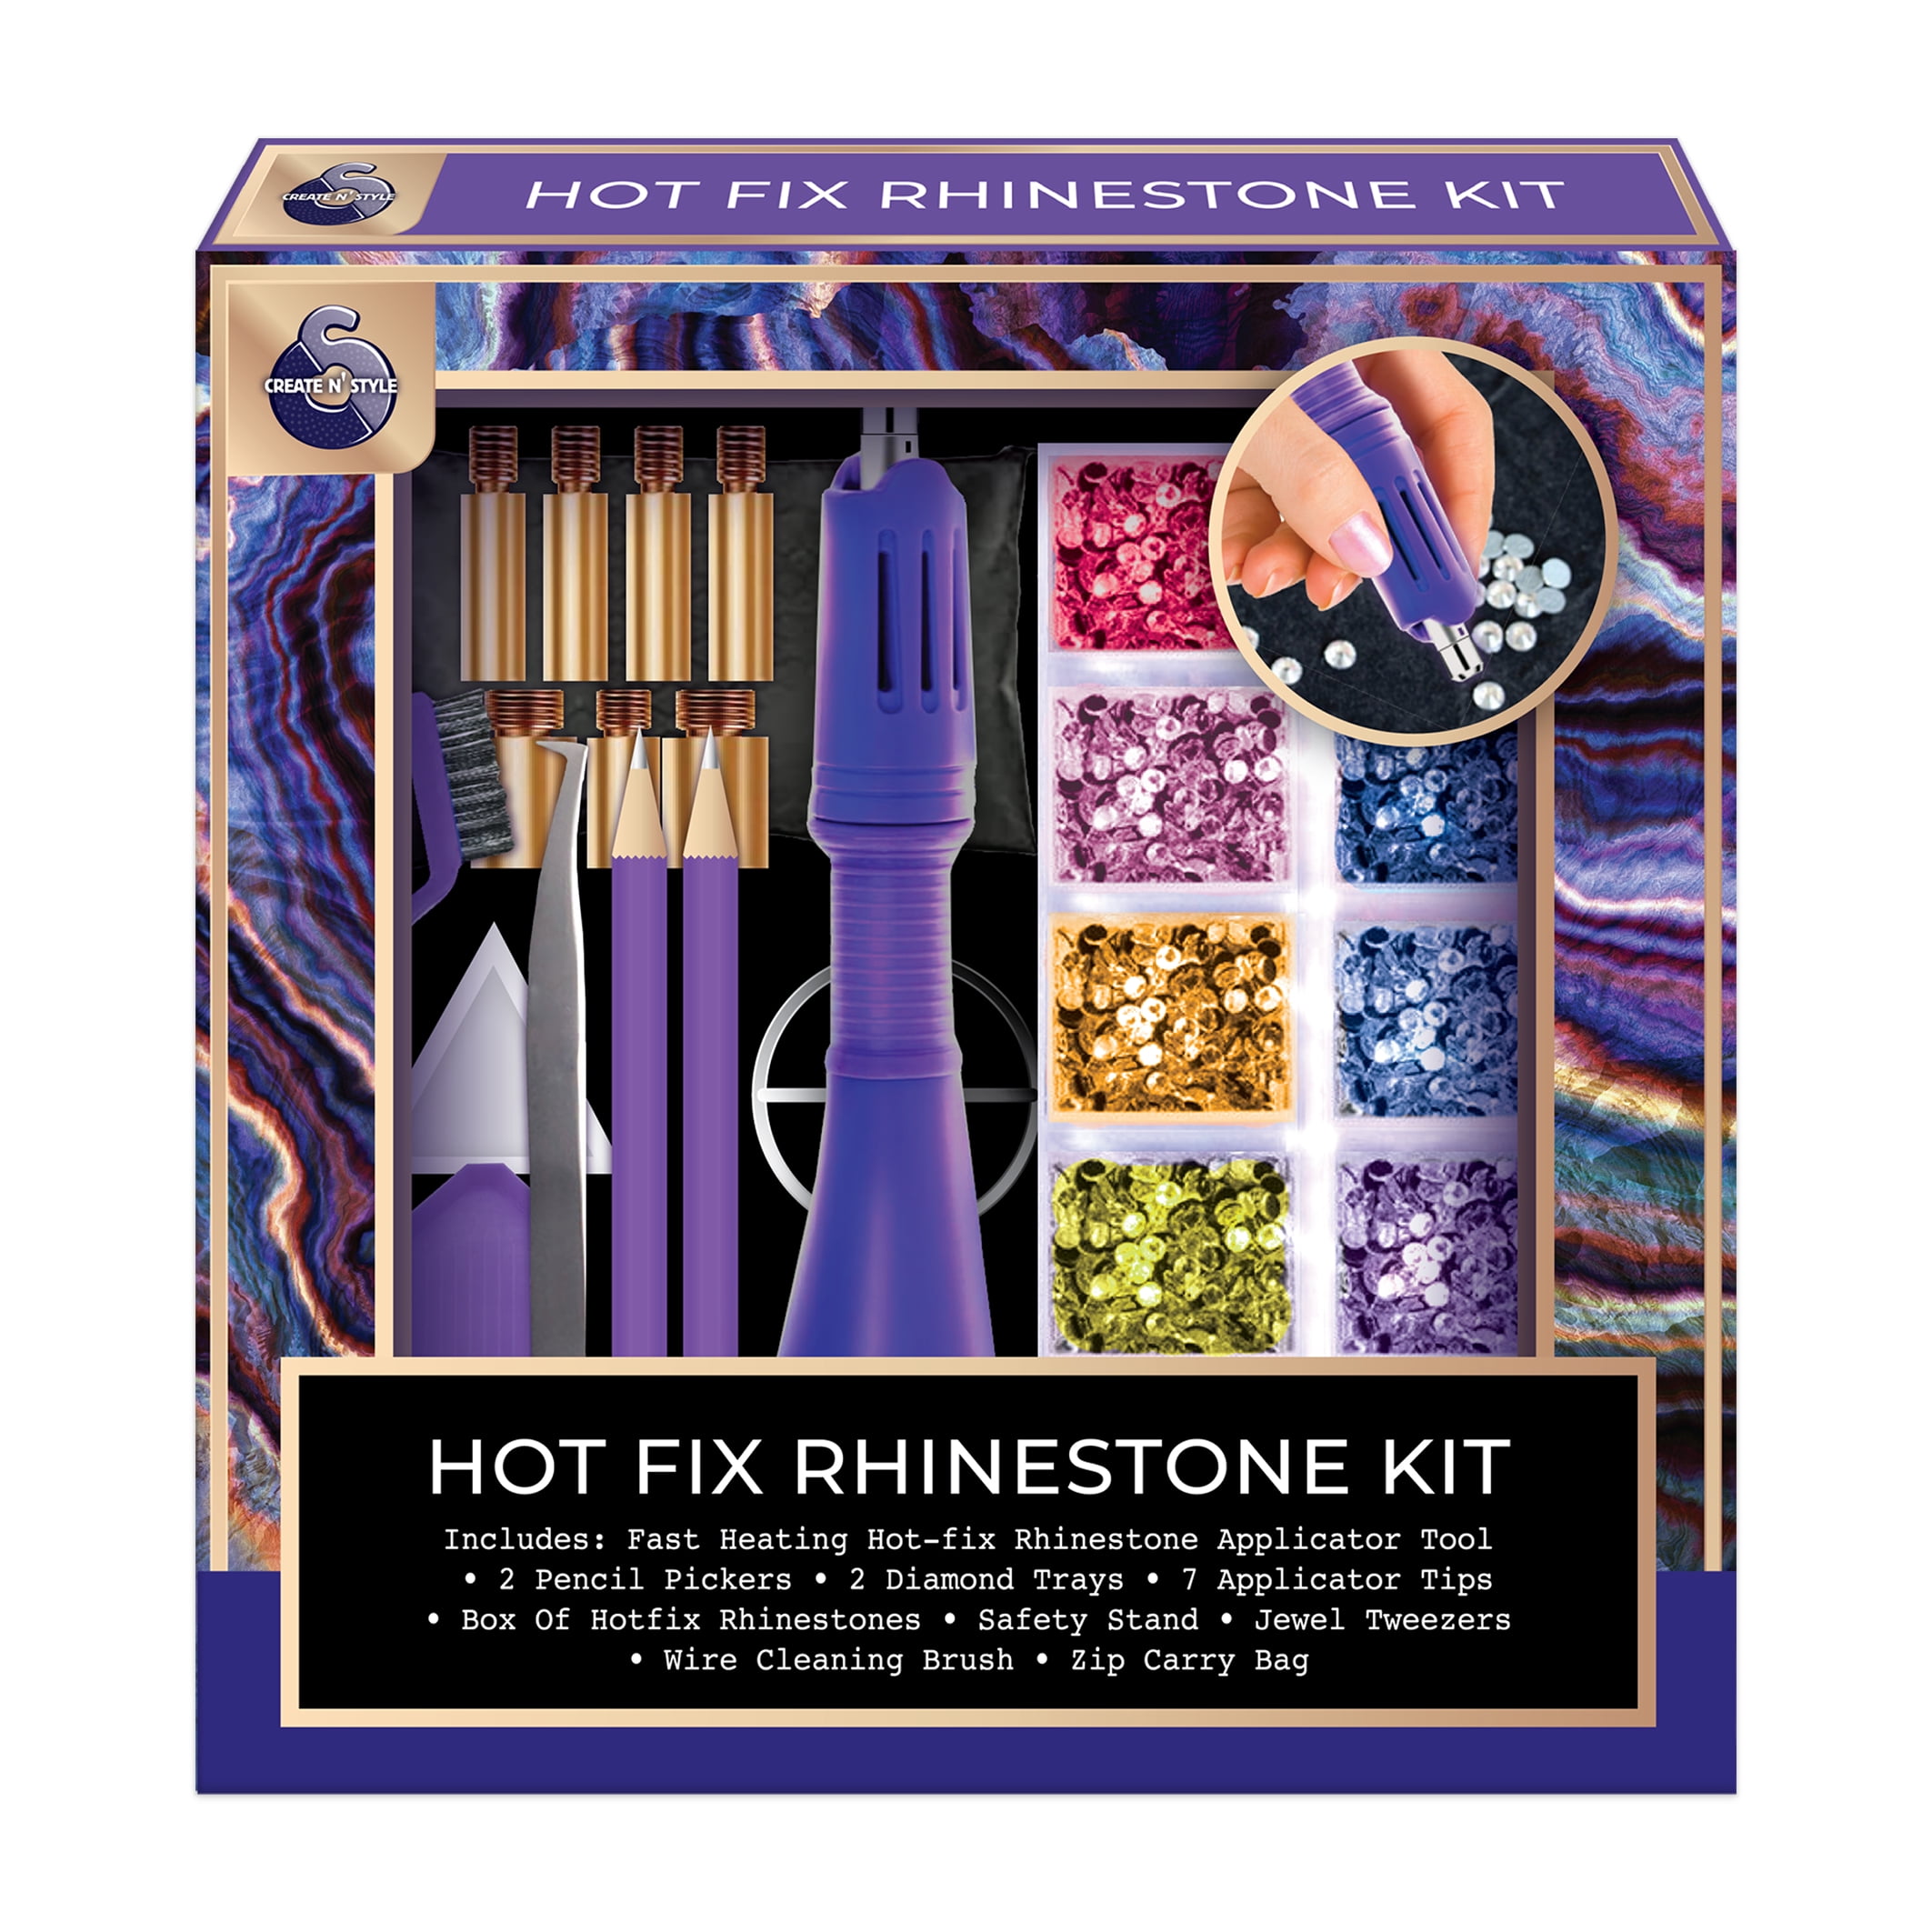 Worthofbest Bedazzler Kit with Rhinestones, Hotfix Rhinestone Applicator  for Fabric and Clothes, Age: 12 and Above